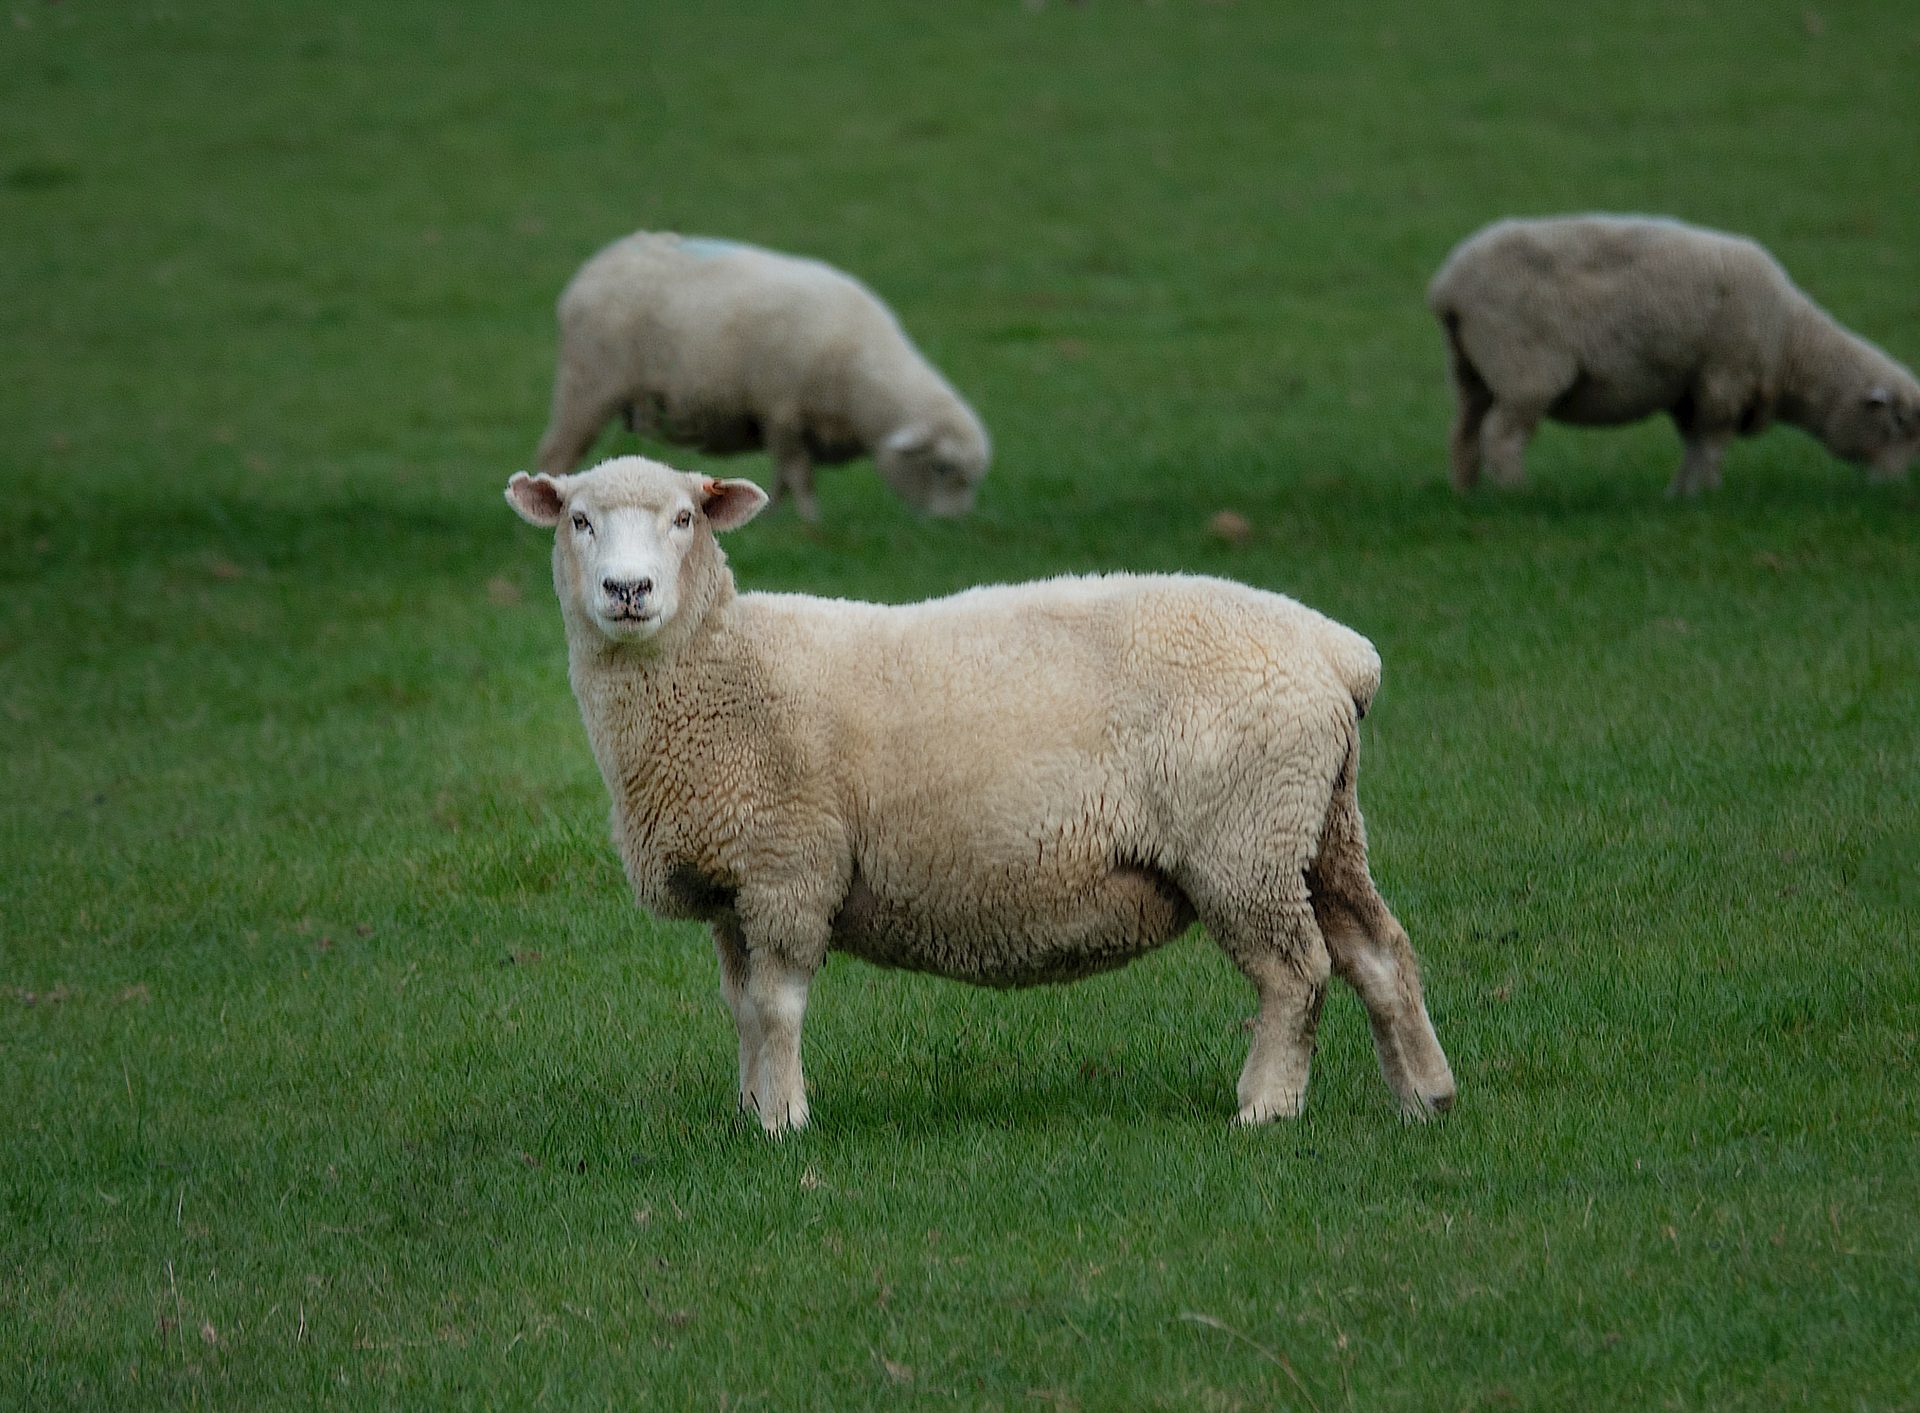 Play the Lameness Game to help reduce antibiotic use in sheep farming